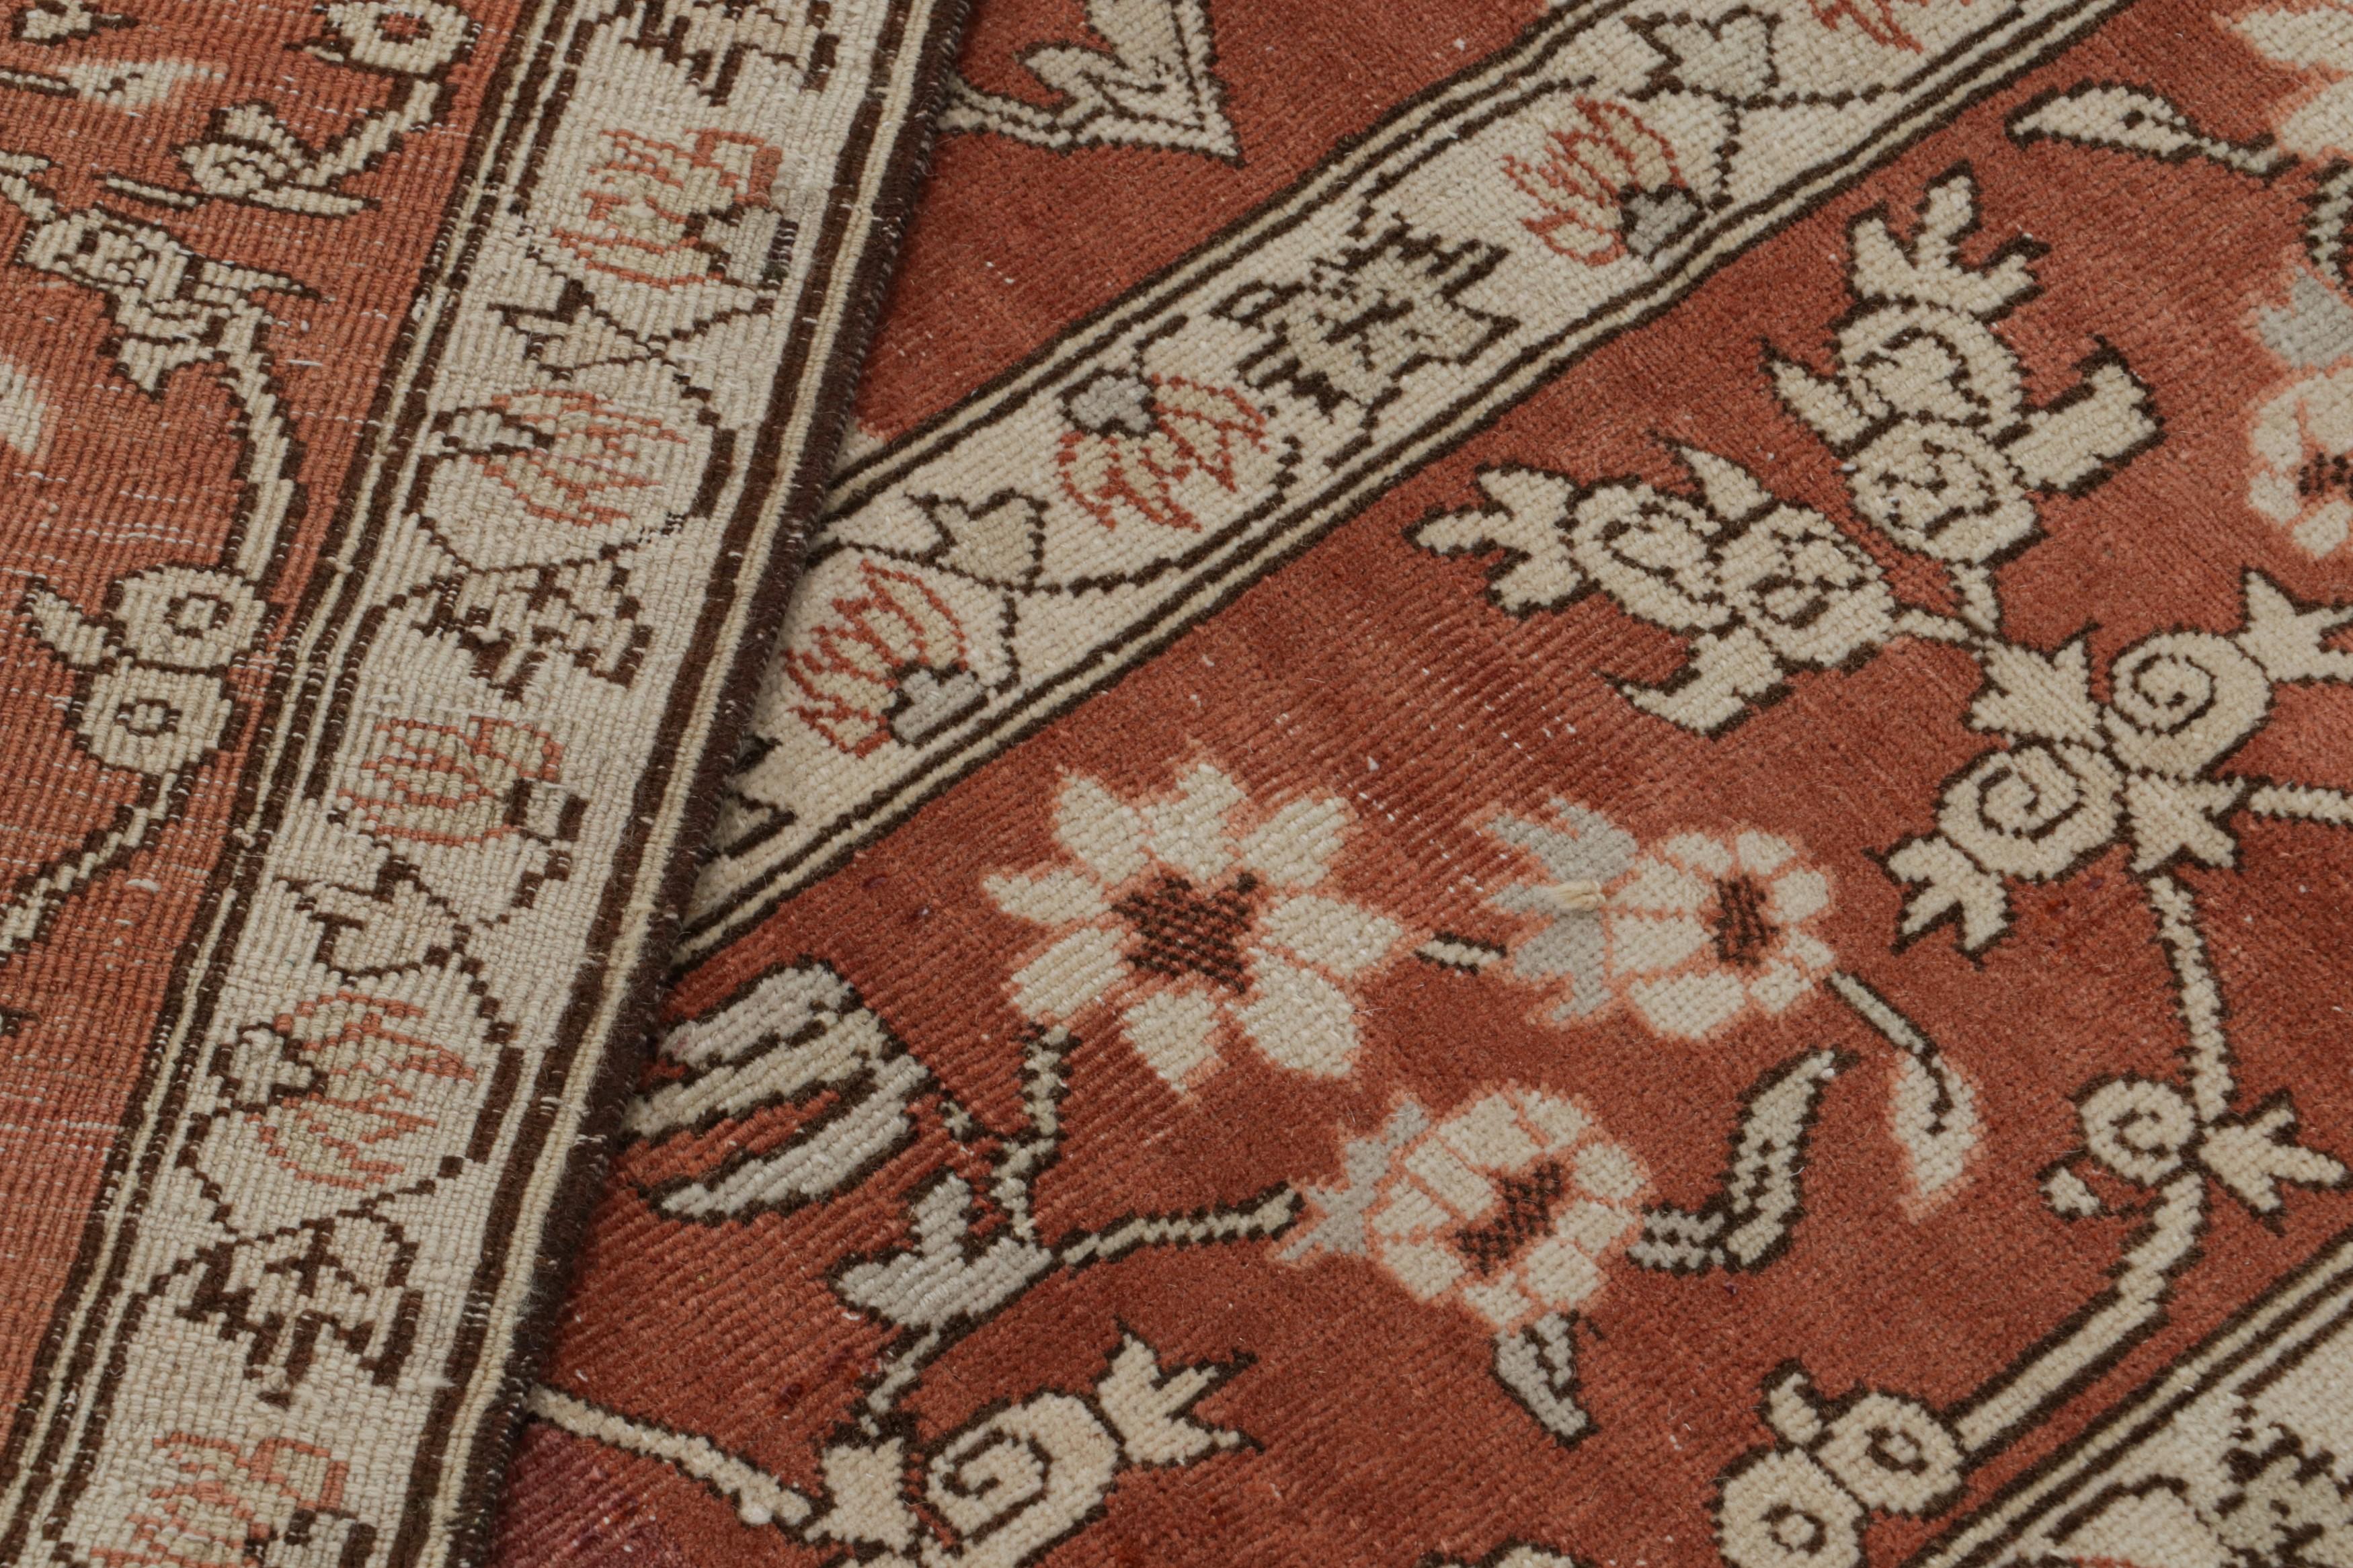 Wool Rug & Kilim’s 17th Century Mogul Style Rug in Red with Beige Floral Patterns For Sale